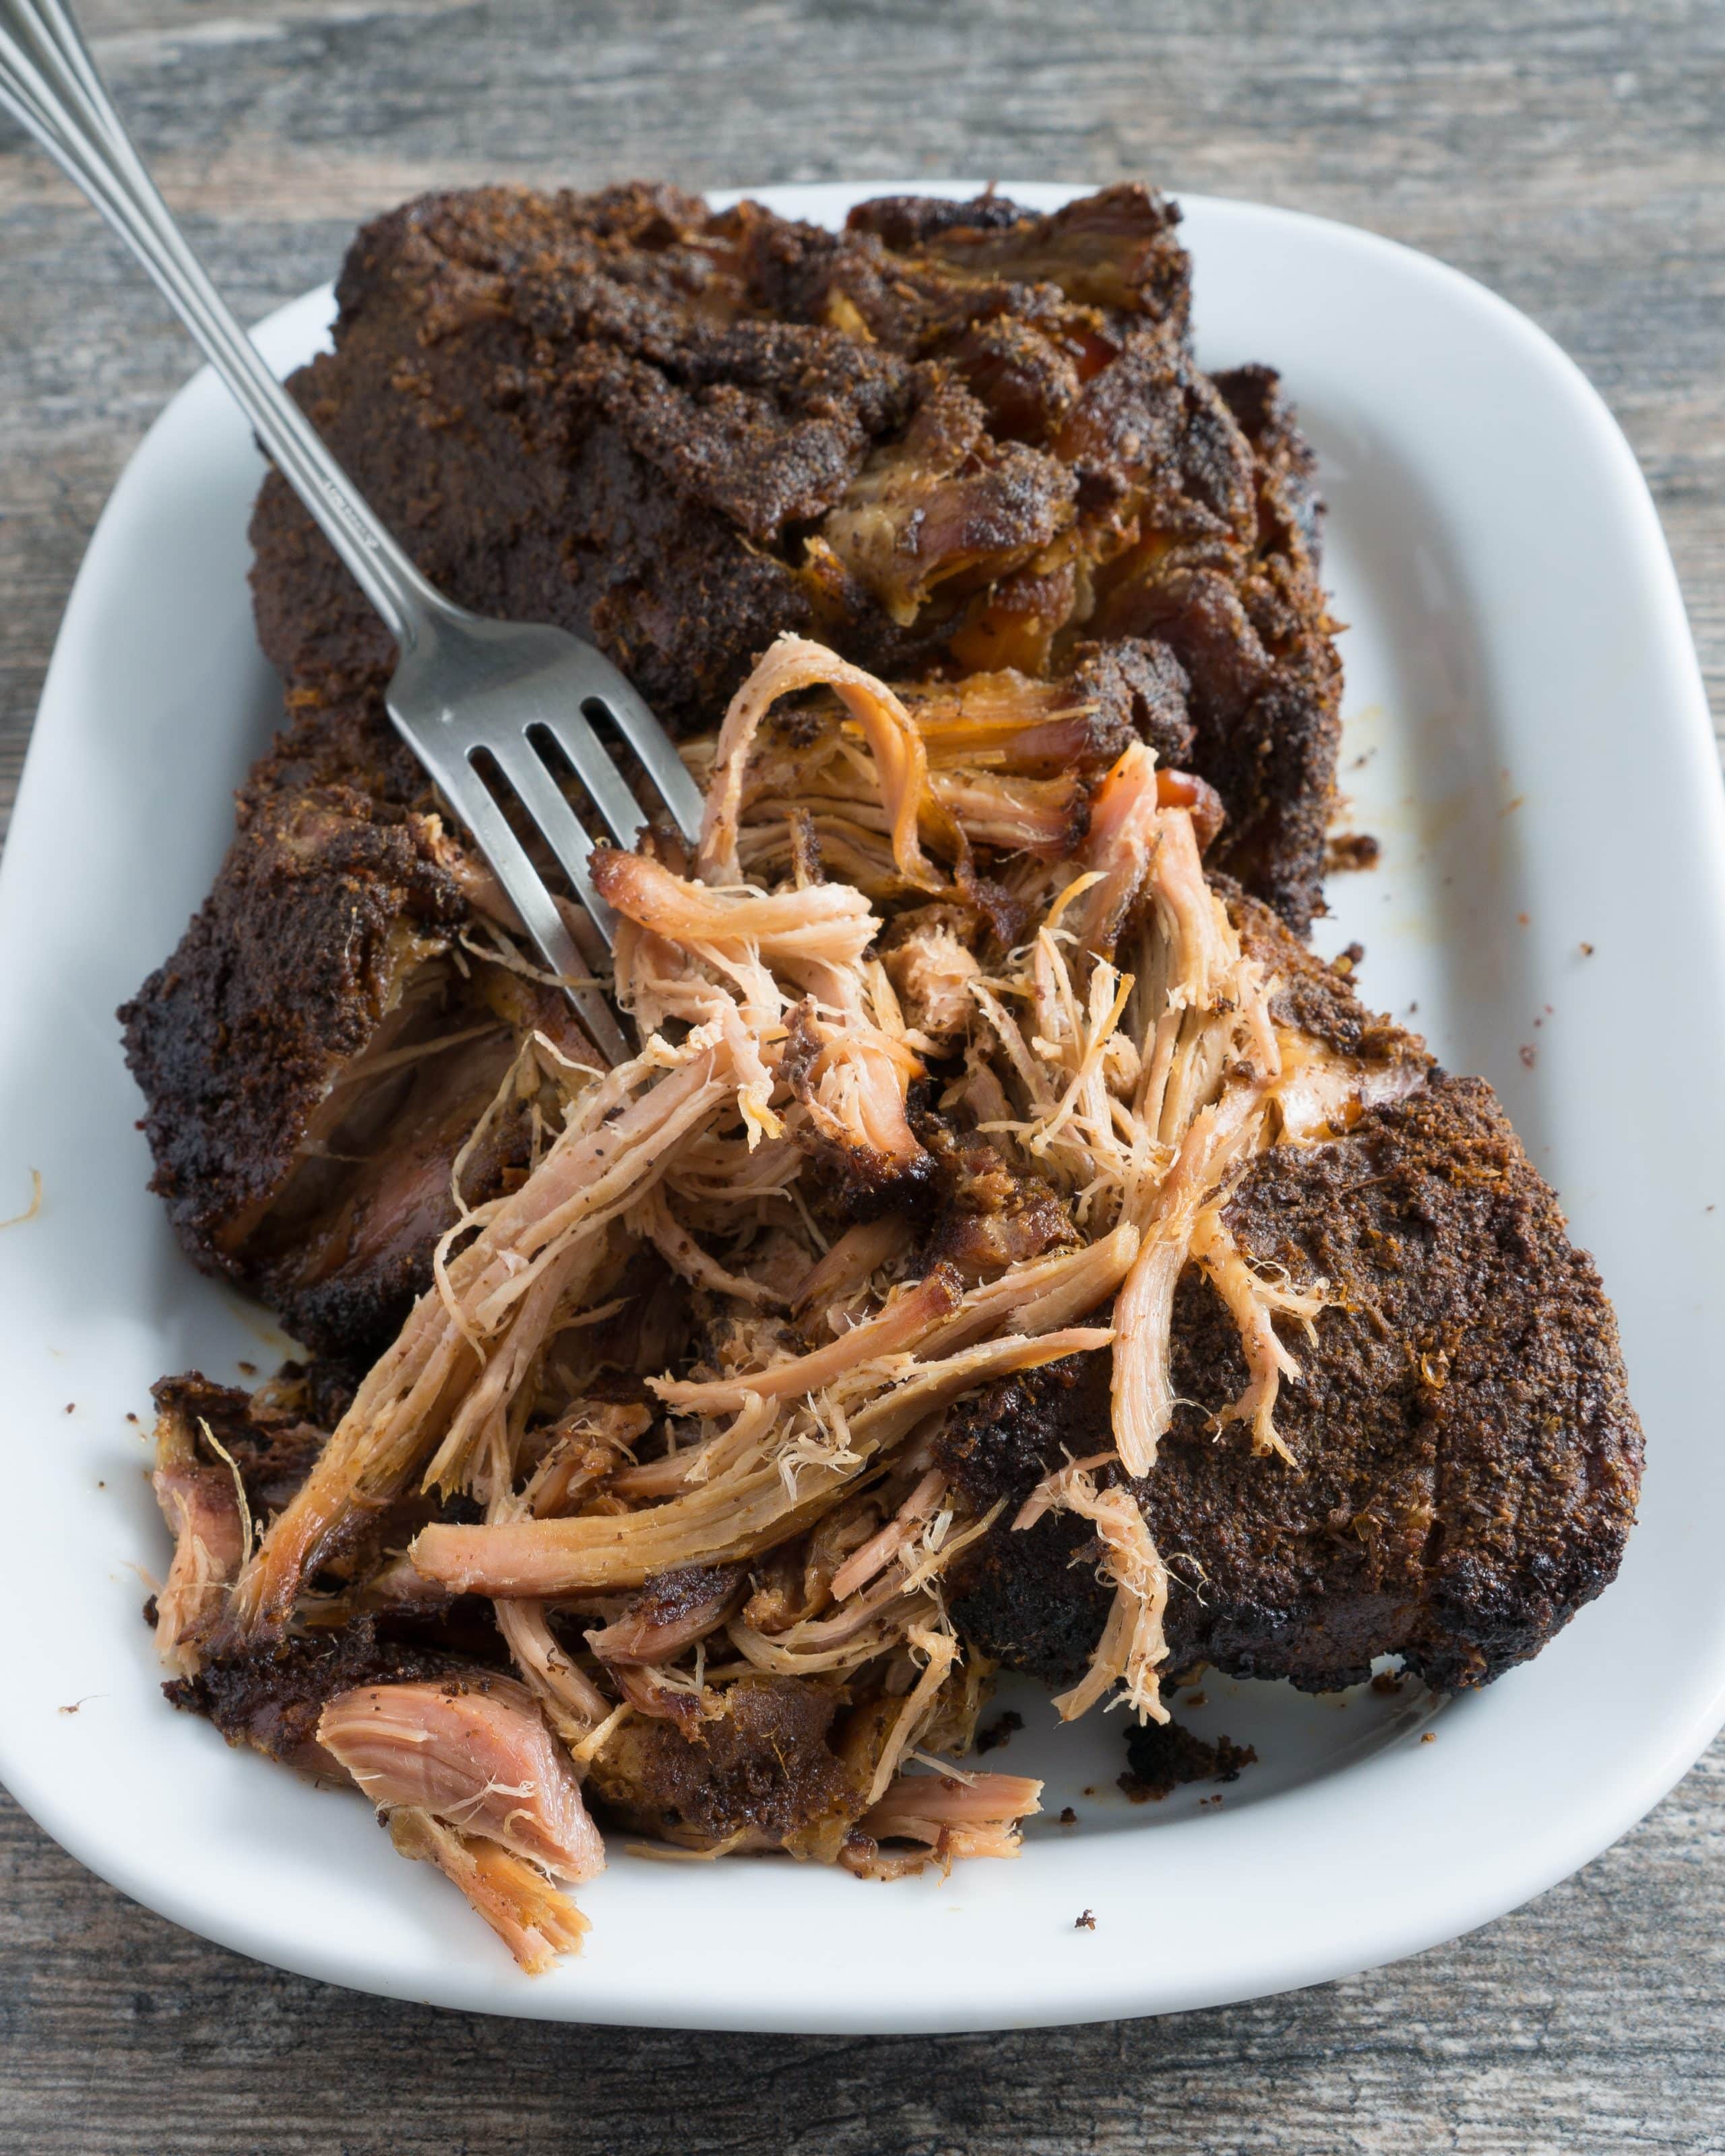 Crispy Crockpot Carnitas – Easy recipe for homemade Crispy Crockpot Carnitas. Gluten-free and paleo-friendly! Perfect for tacos, burritos, nachos, enchiladas, sandwiches, and more! Just combine pork shoulder with a simple dry-rub & a squeeze of citrus, then let your slow cooker do the rest. We love this on top of eggs for a quick, savory breakfast! ♥ | freeyourfork.com